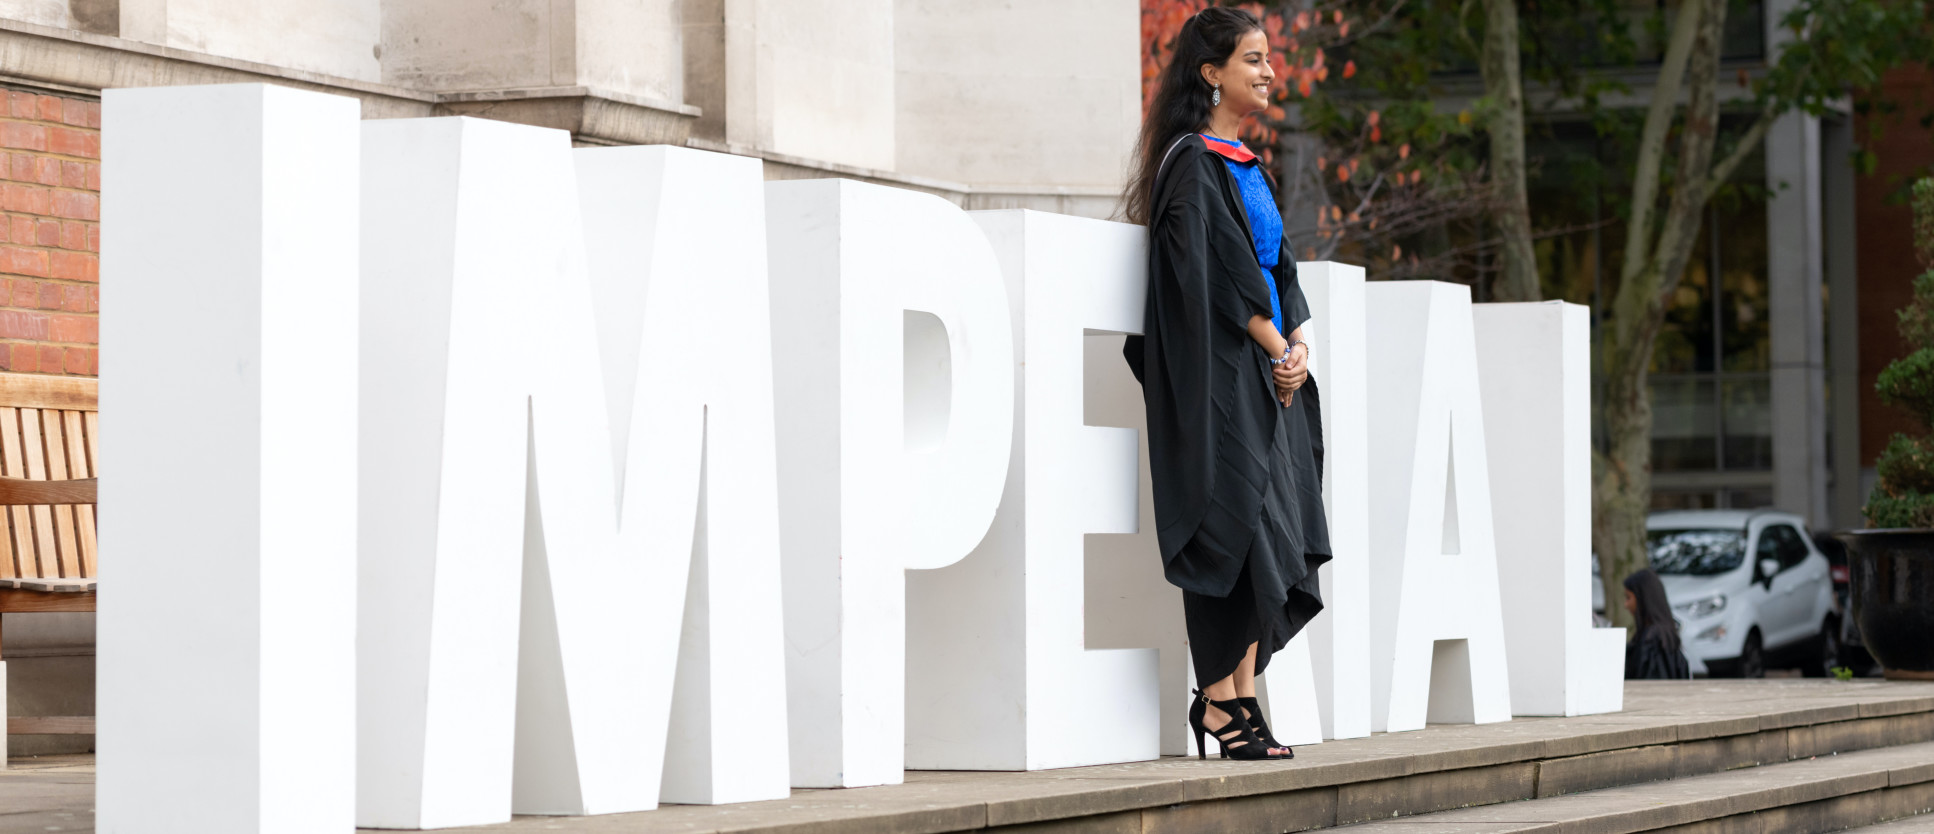 Student at Graduation in front of Imperial sign